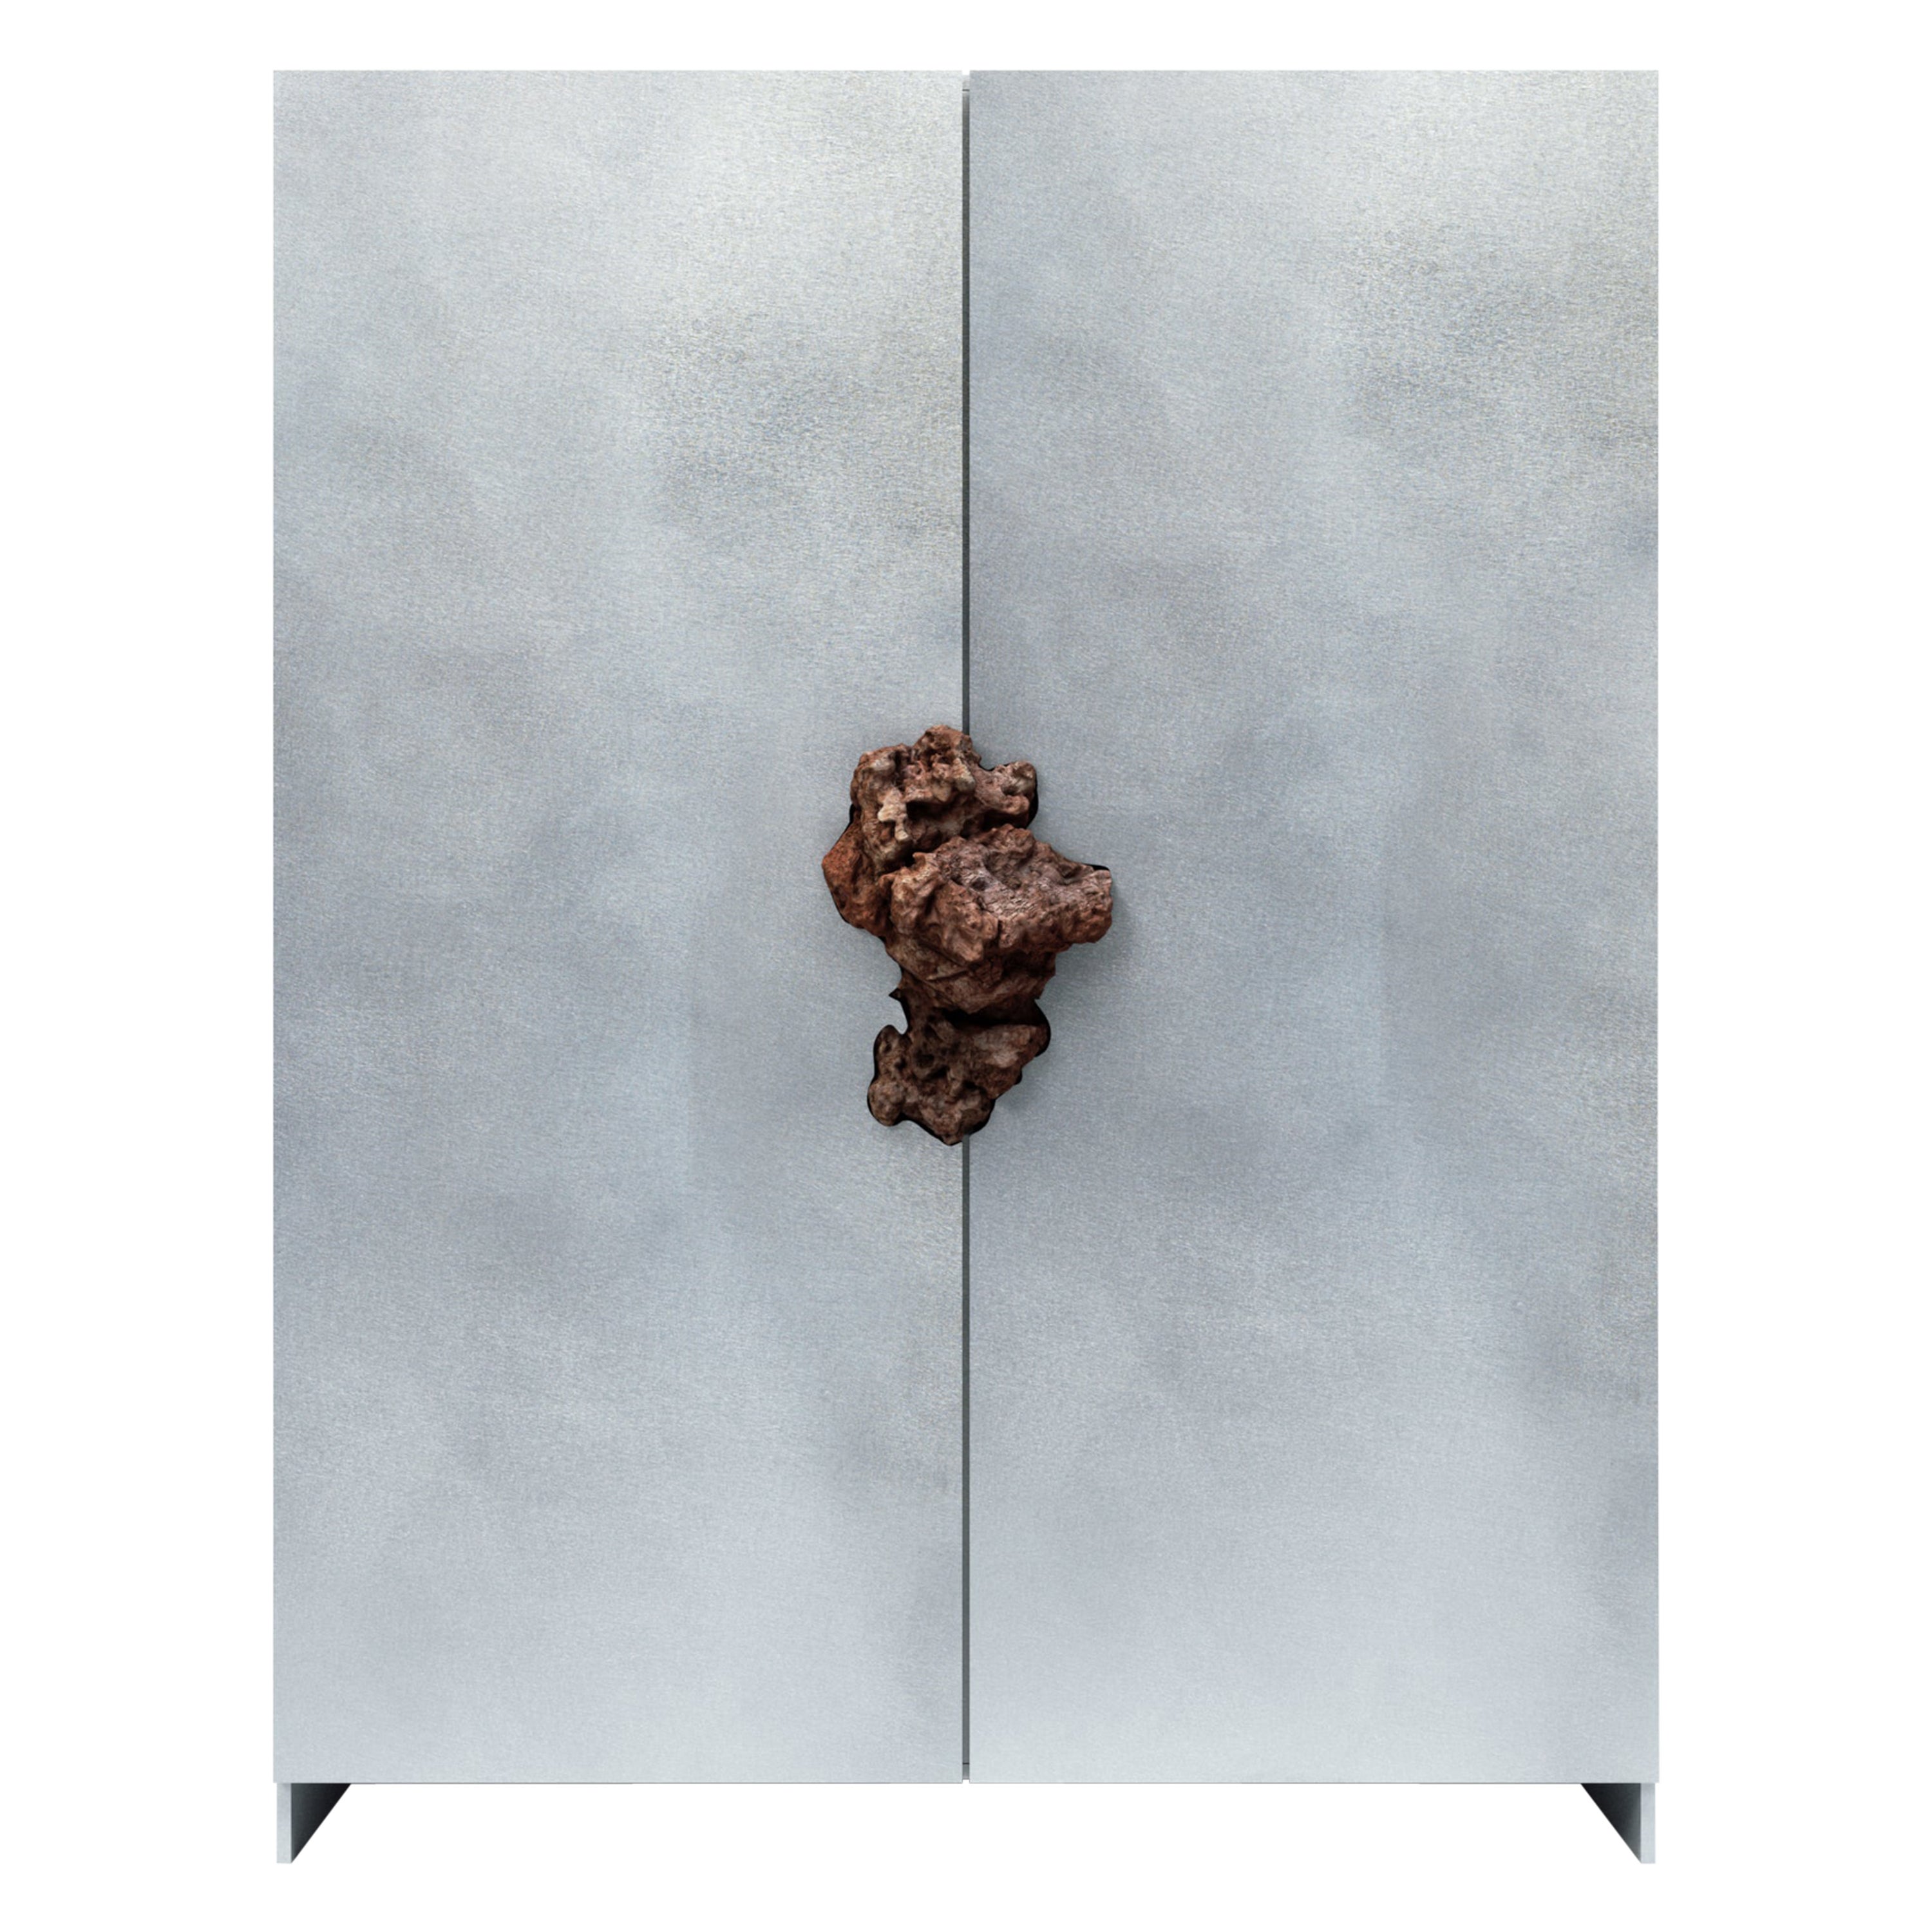 Oxidized and Waxed Aluminium Small Cabinet with Lava Stone by Pierre De Valck